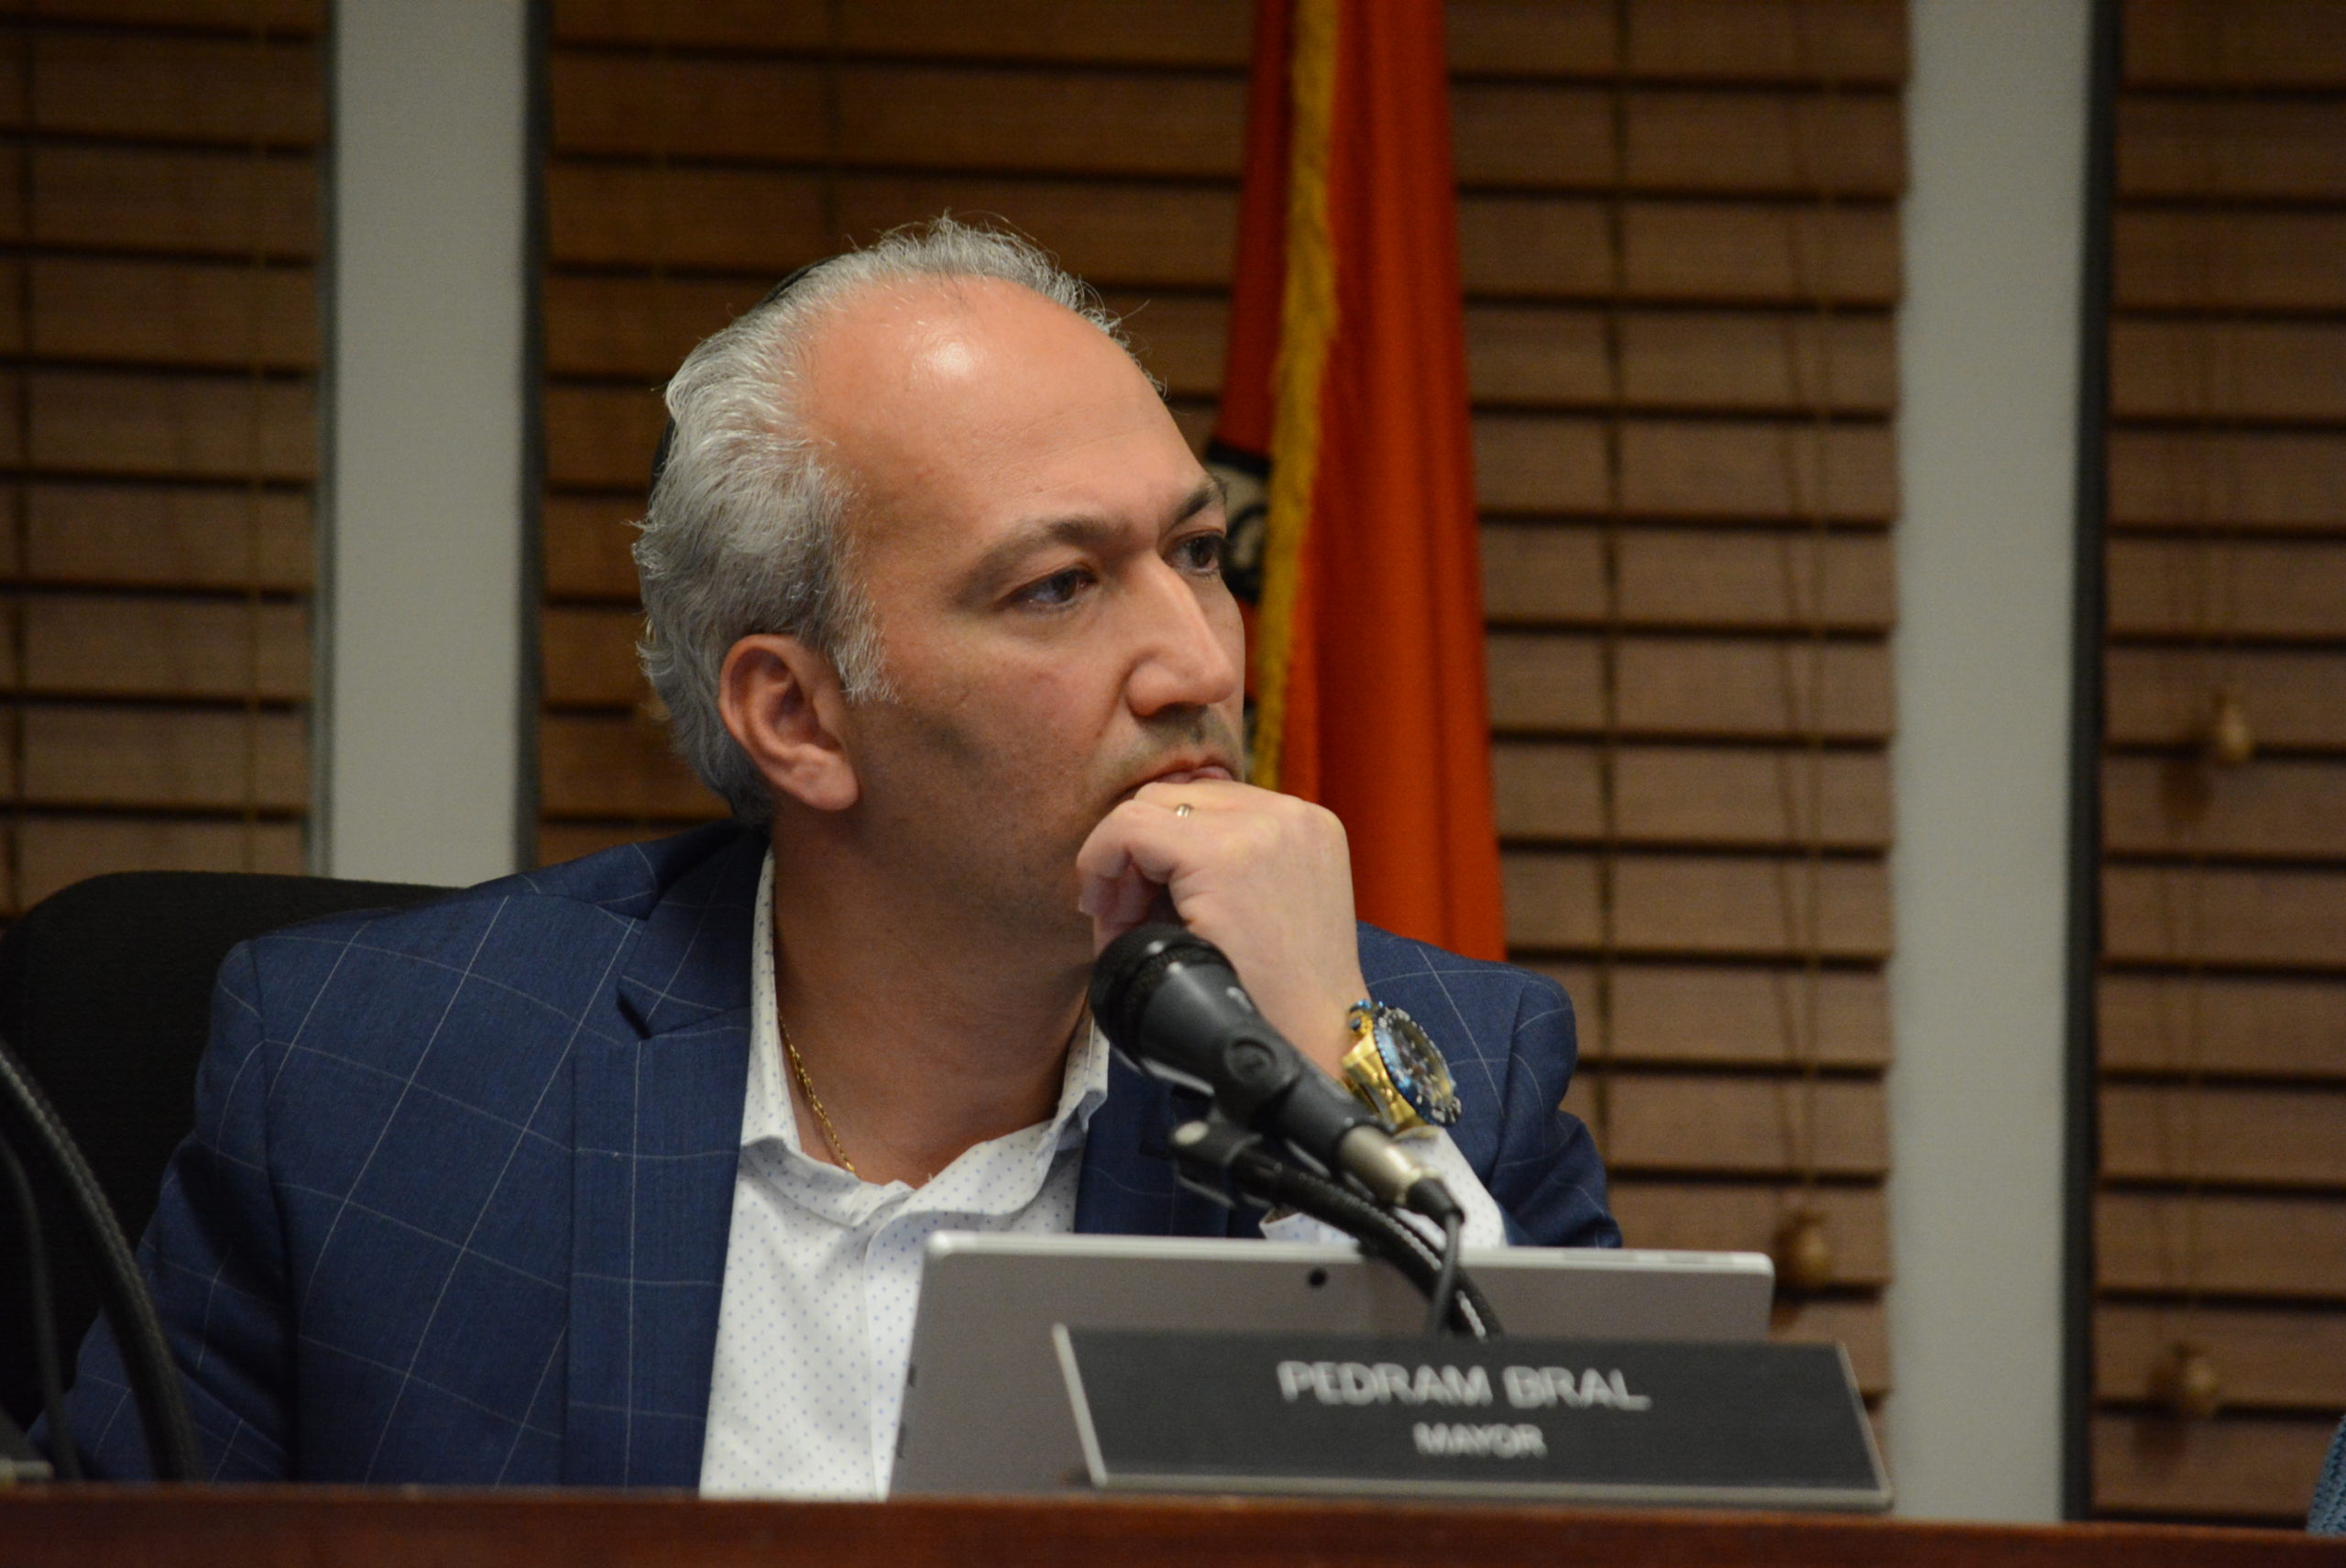 Great Neck Village Mayor Pedram Bral at Tuesday night's meeting. (Photo by Janelle Clausen)